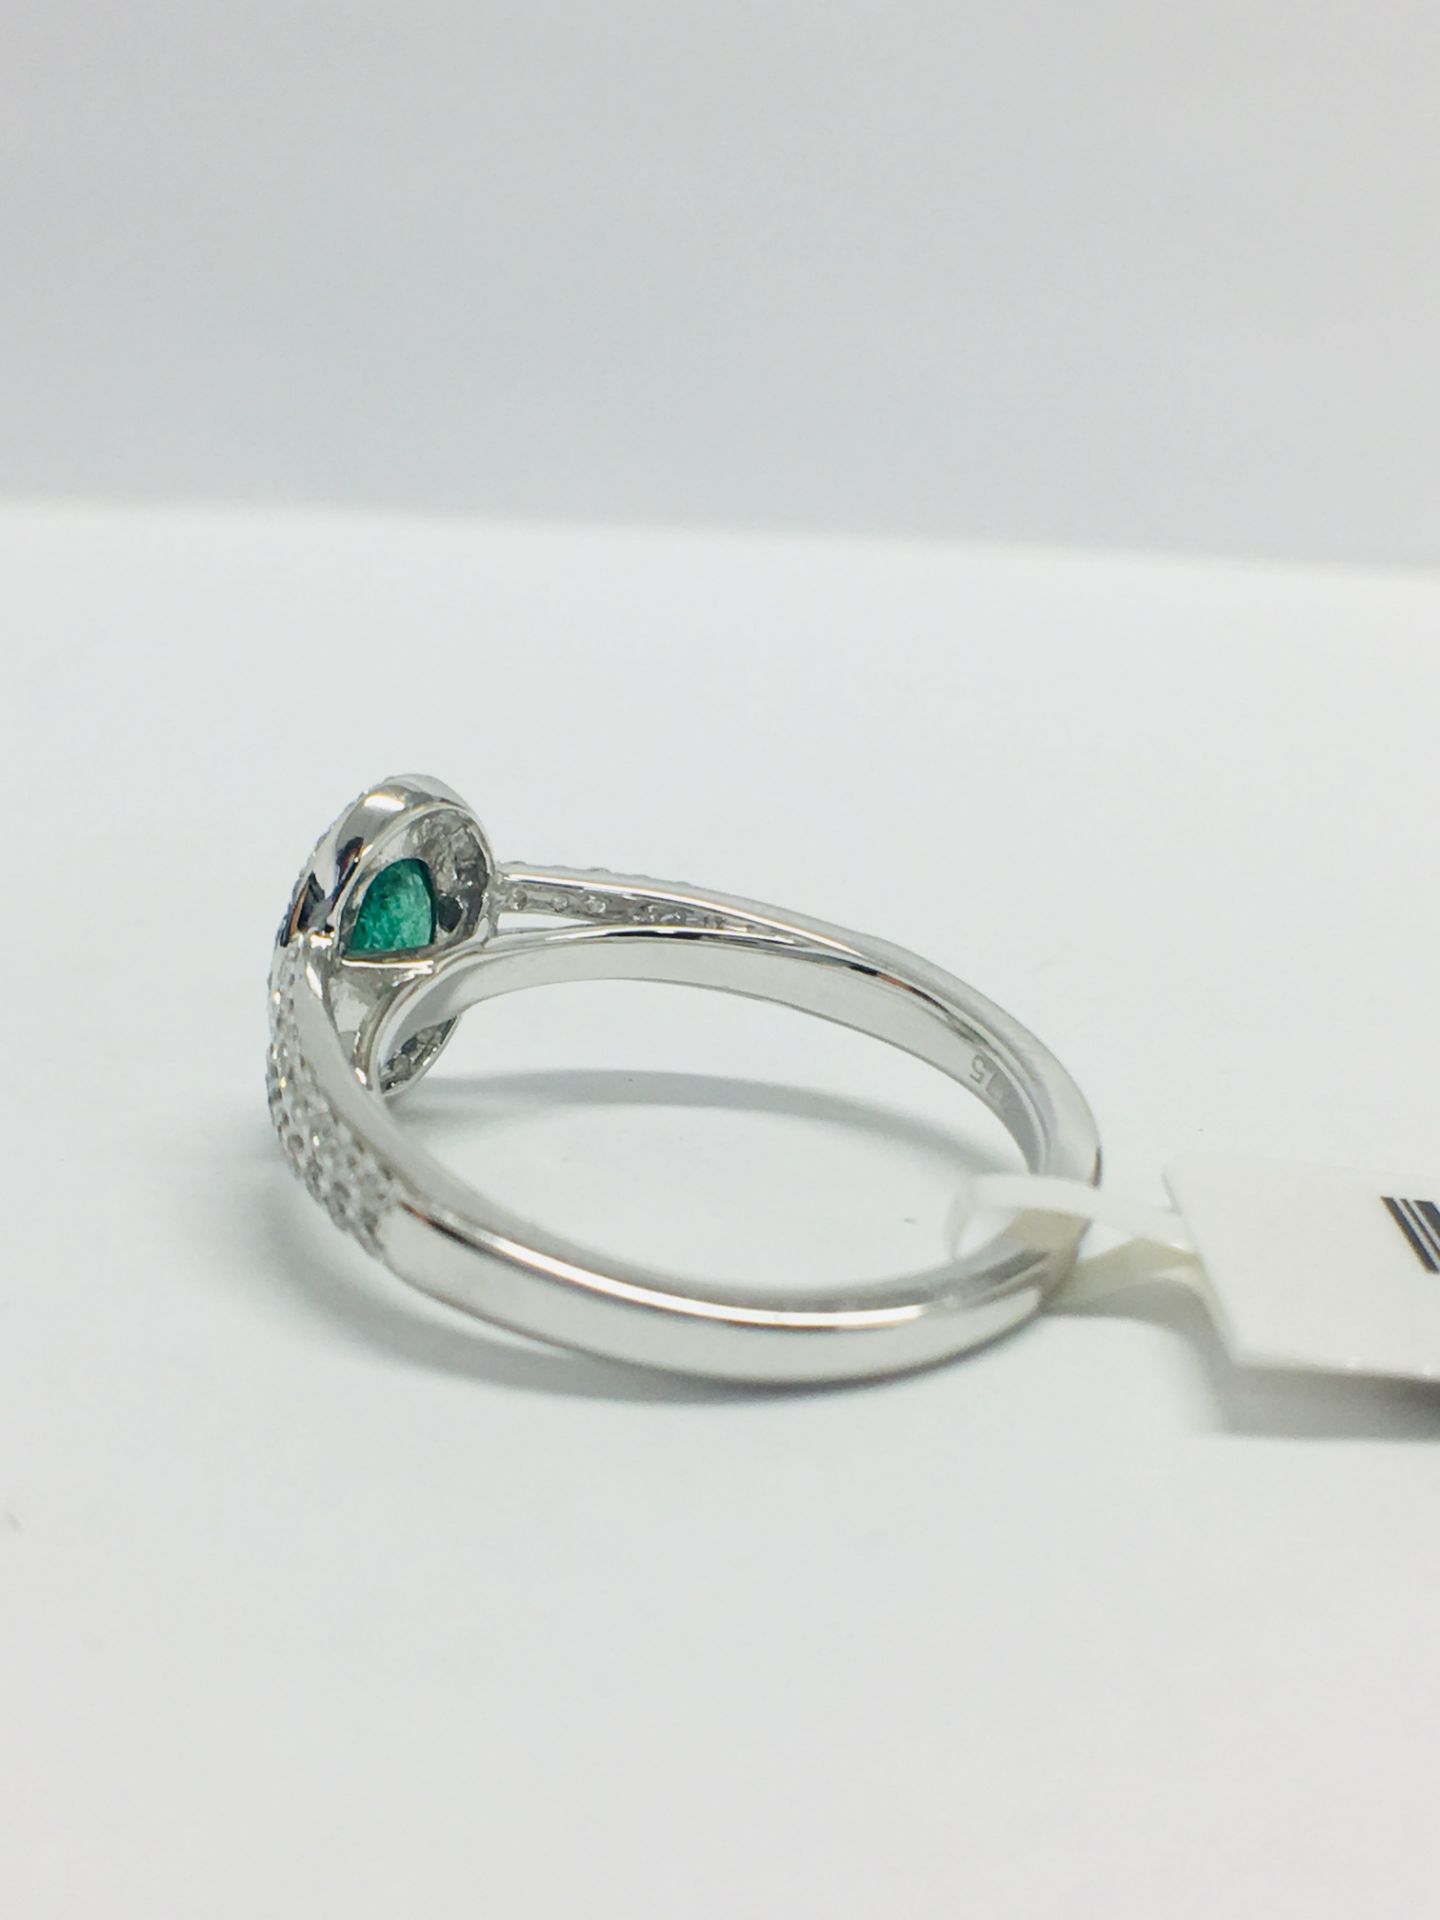 9ct White Gold Emerald Diamond Cluster Ring - Image 4 of 10